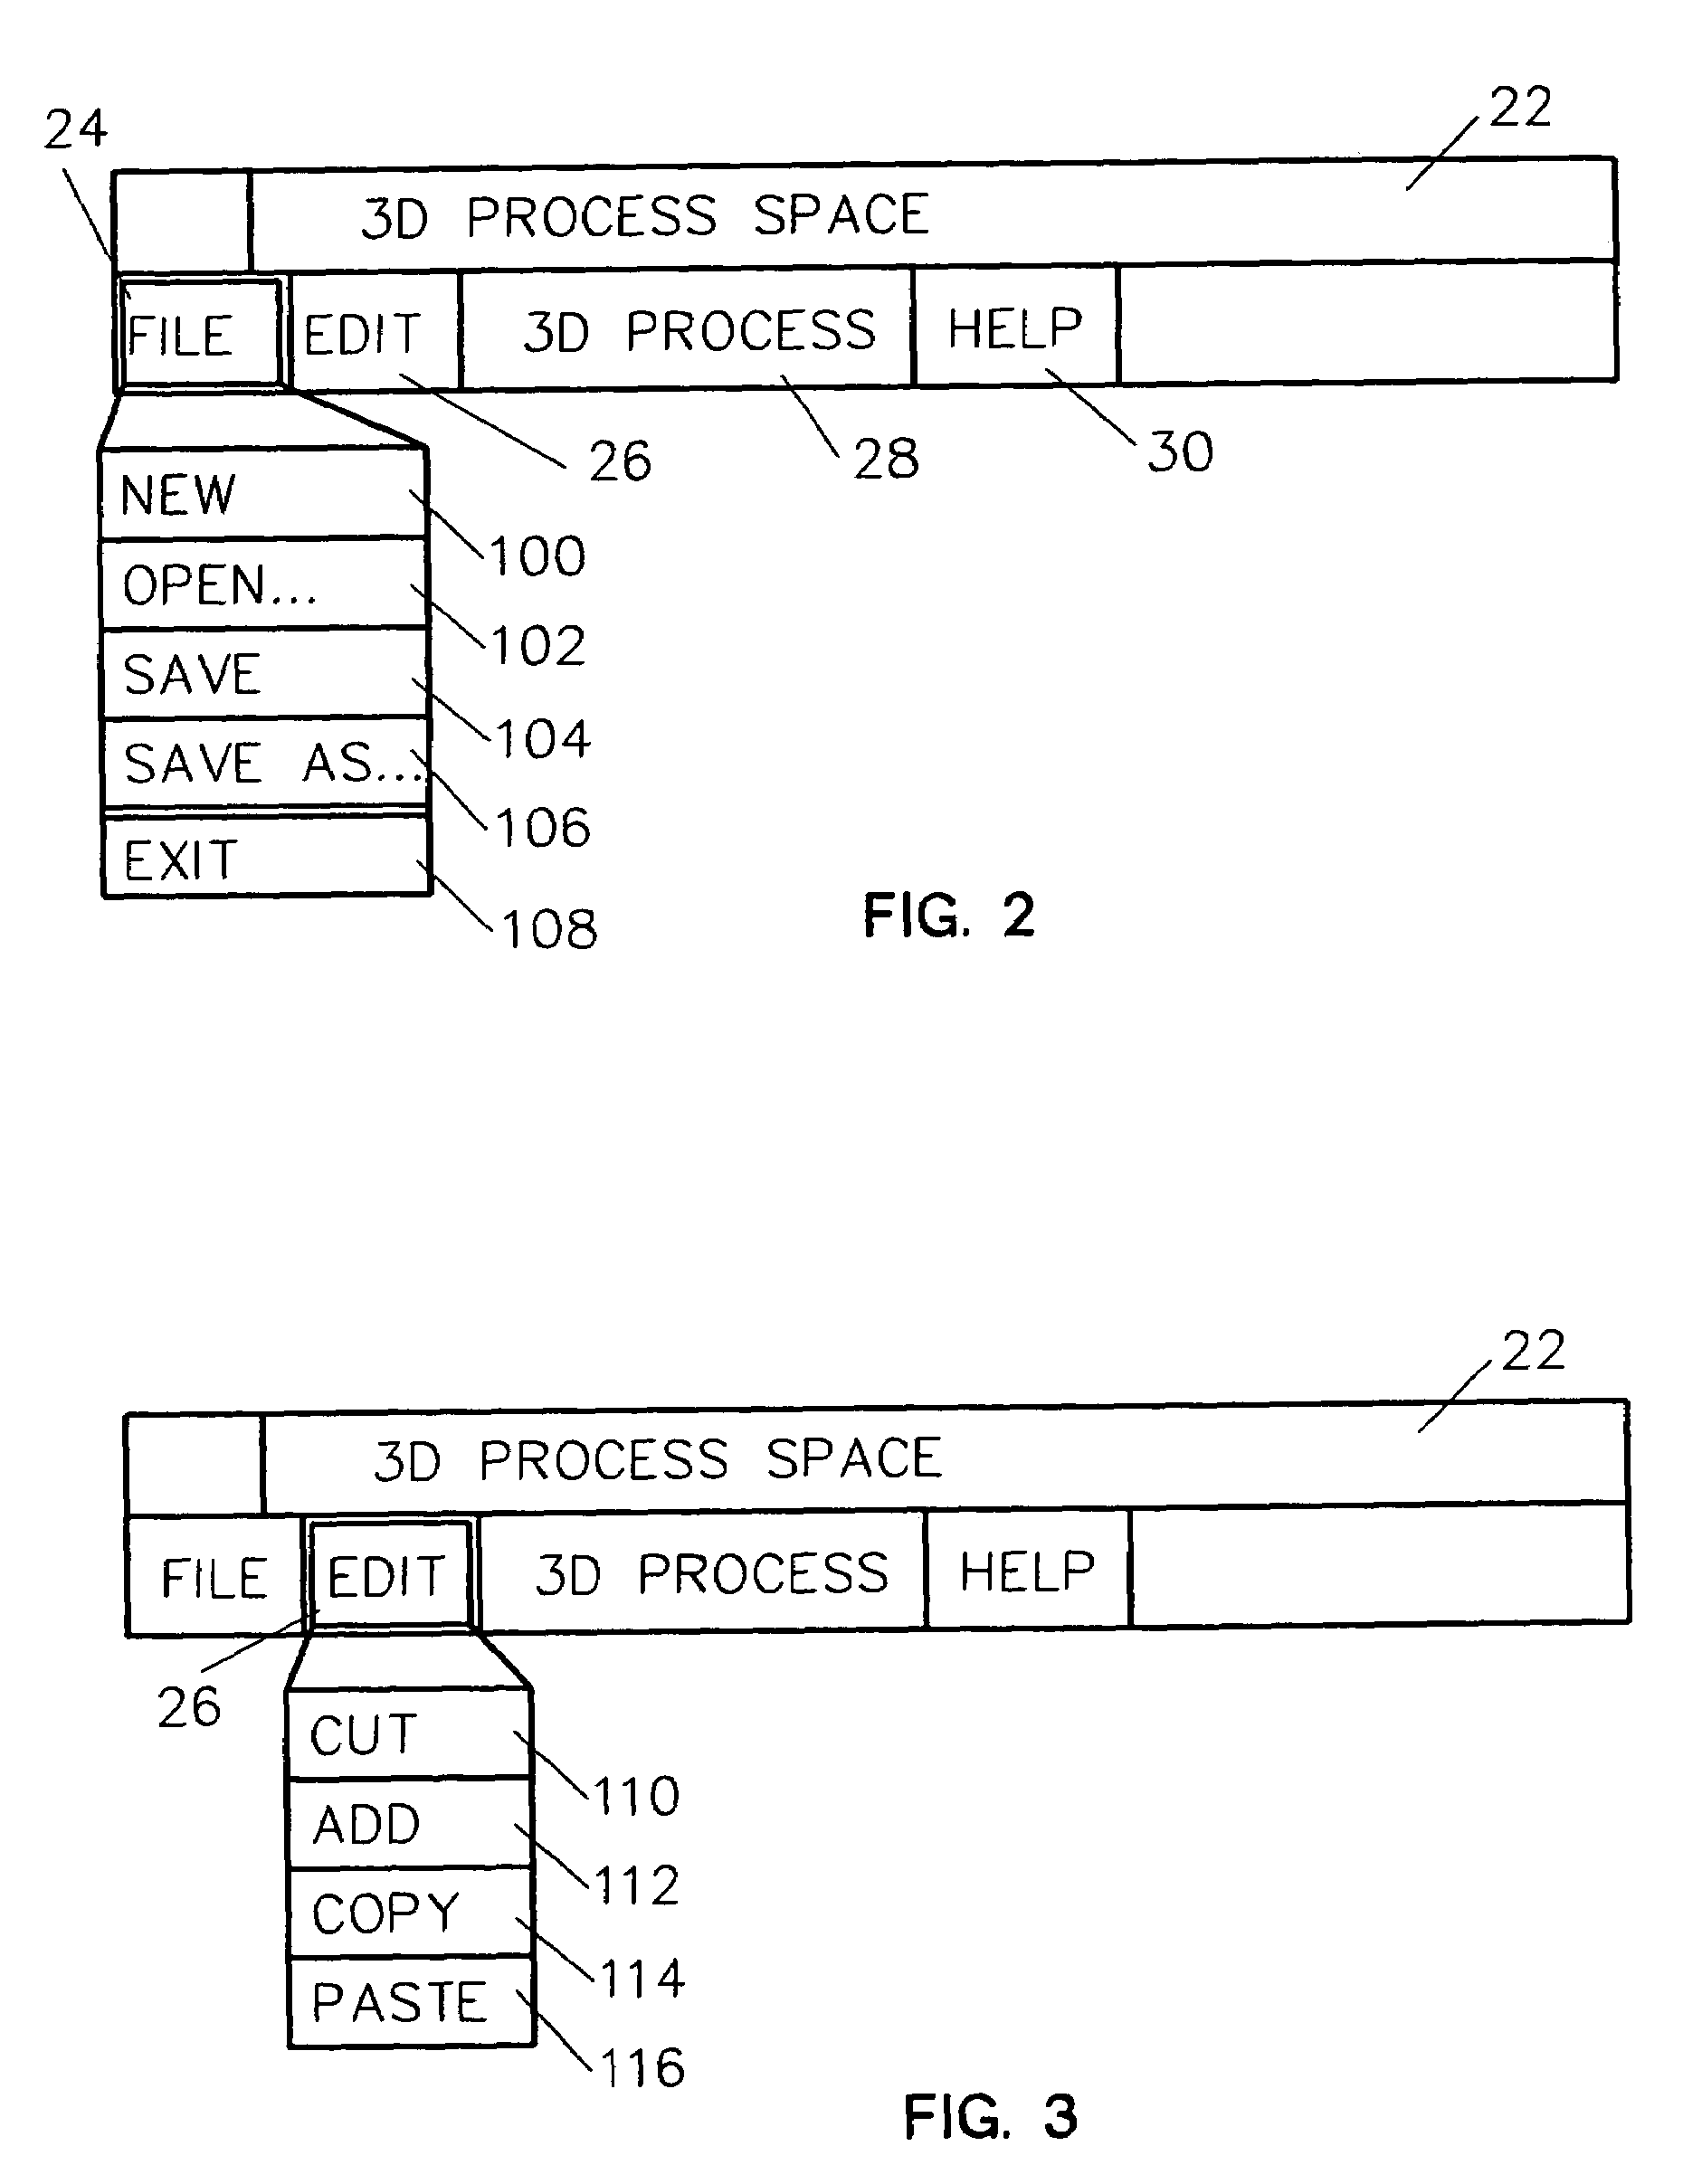 System and method for business process space definition